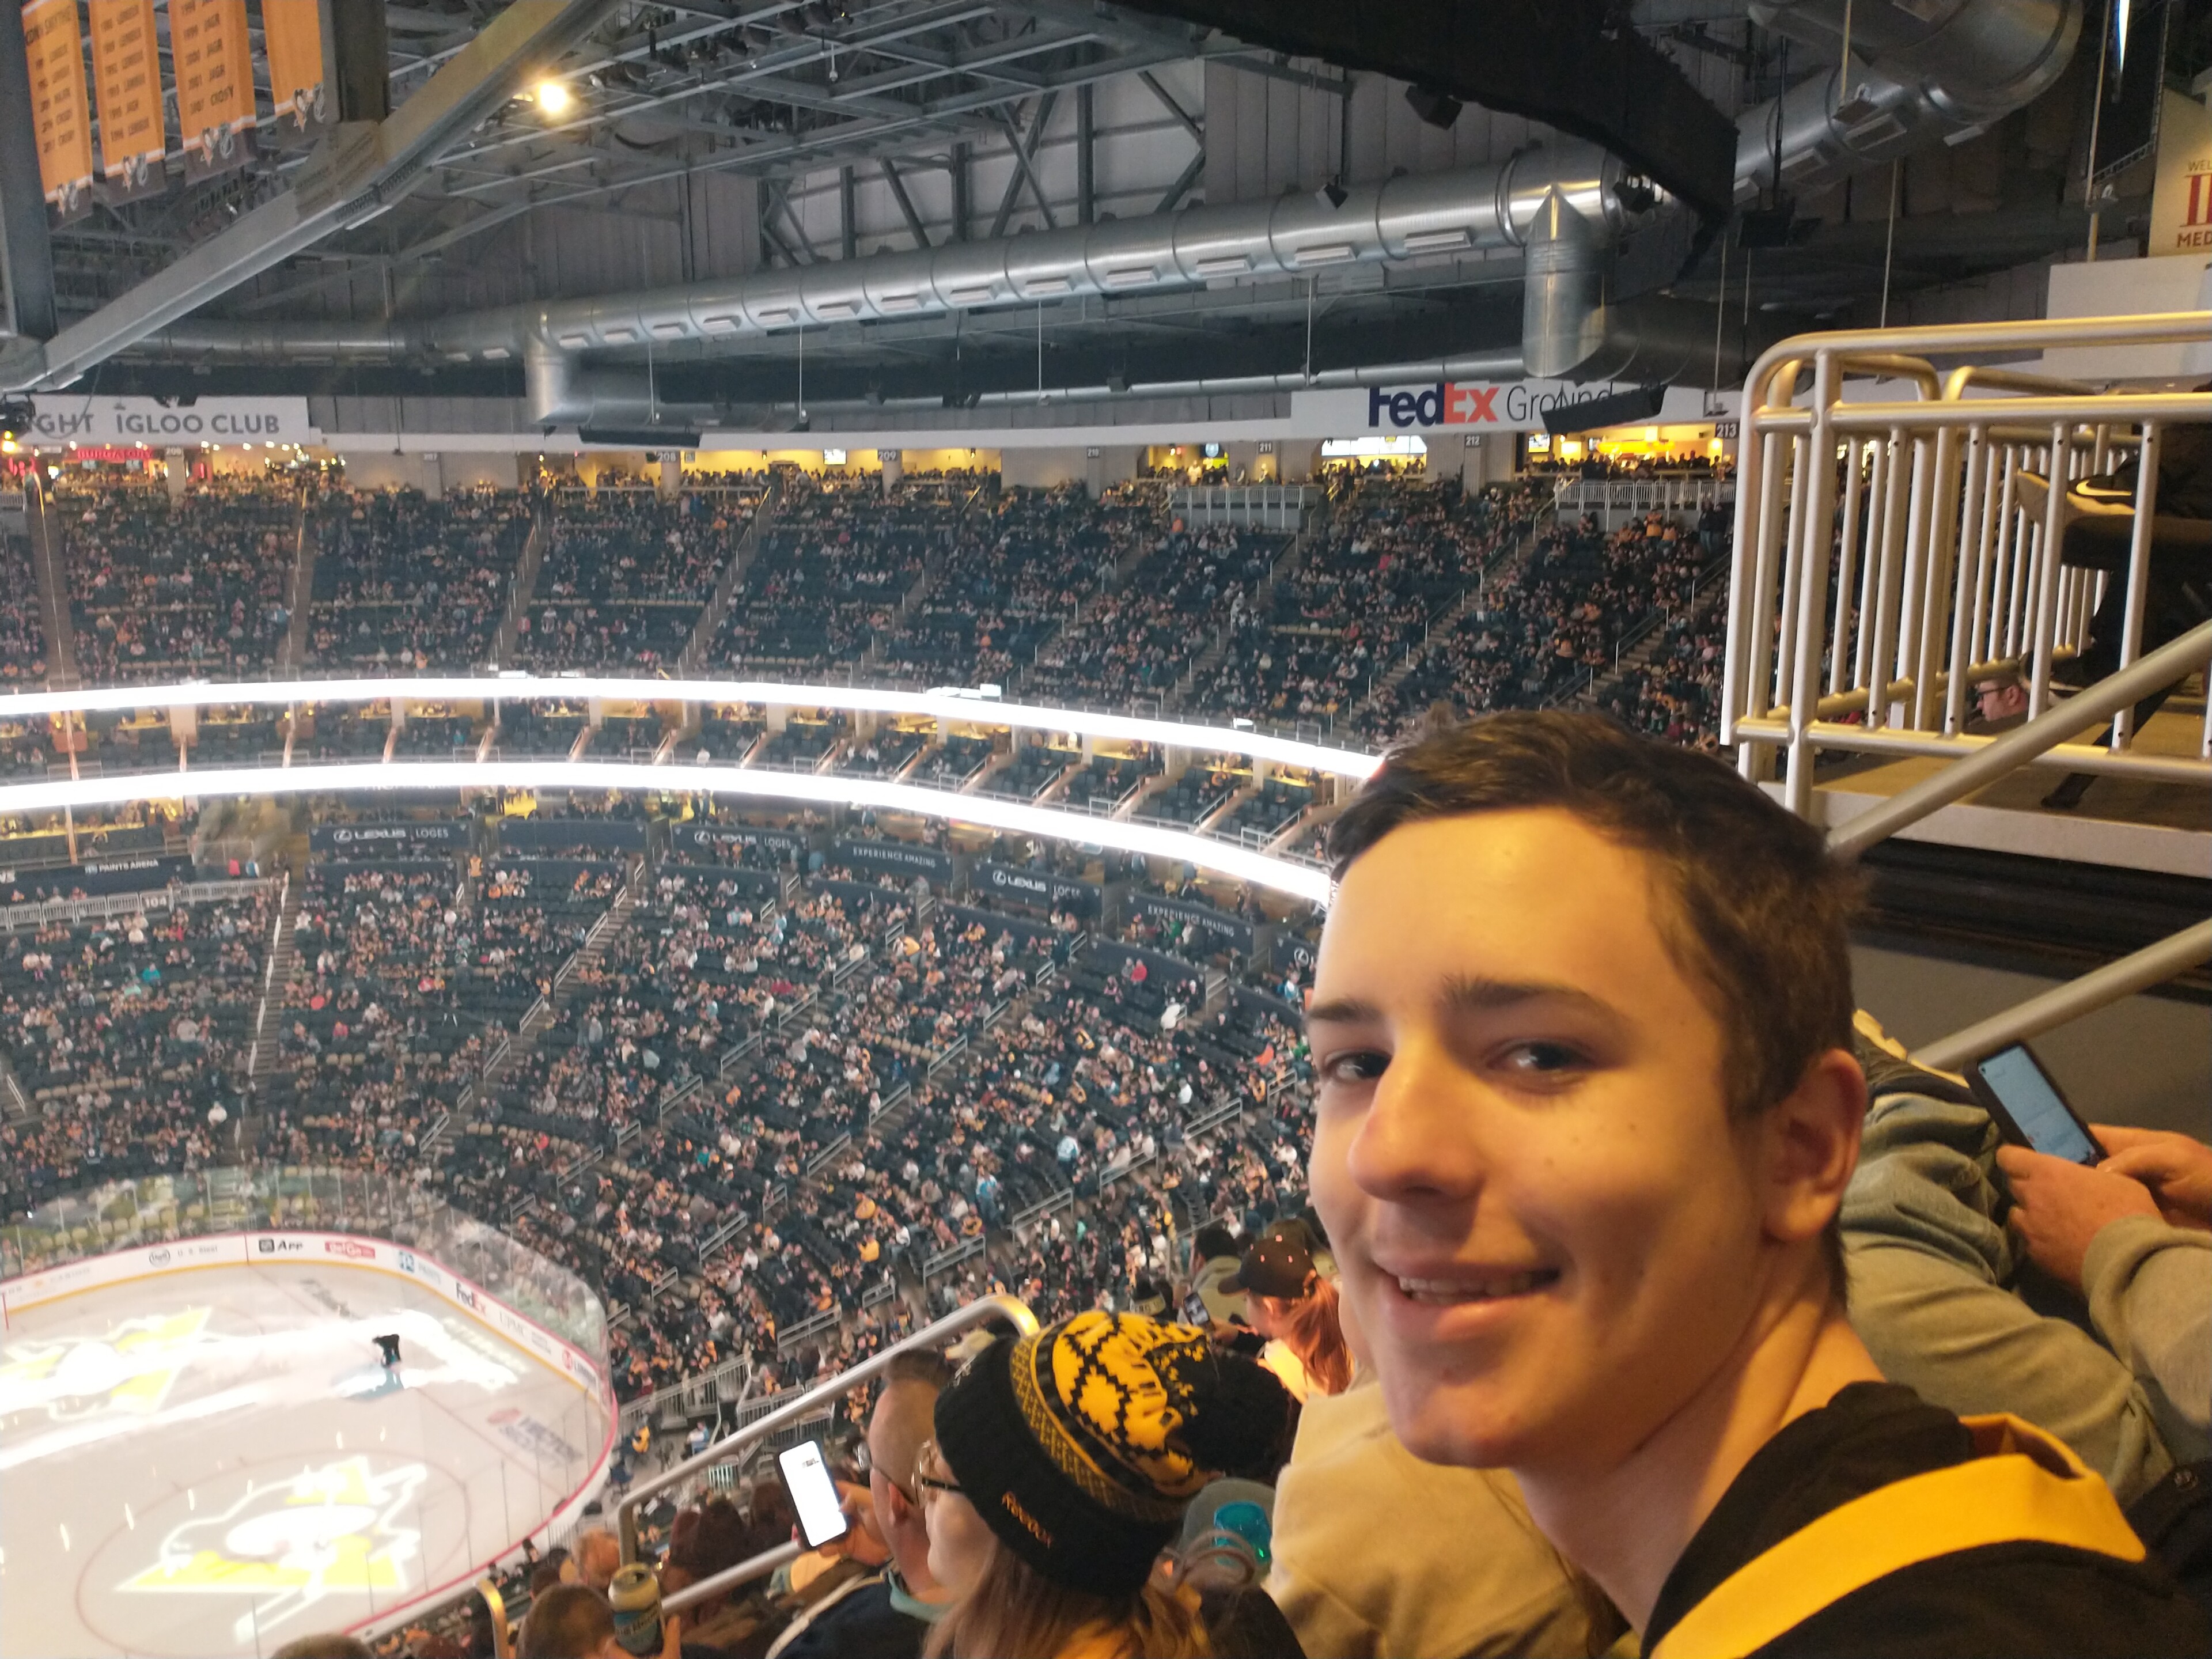 Section 212 at PPG Paints Arena 